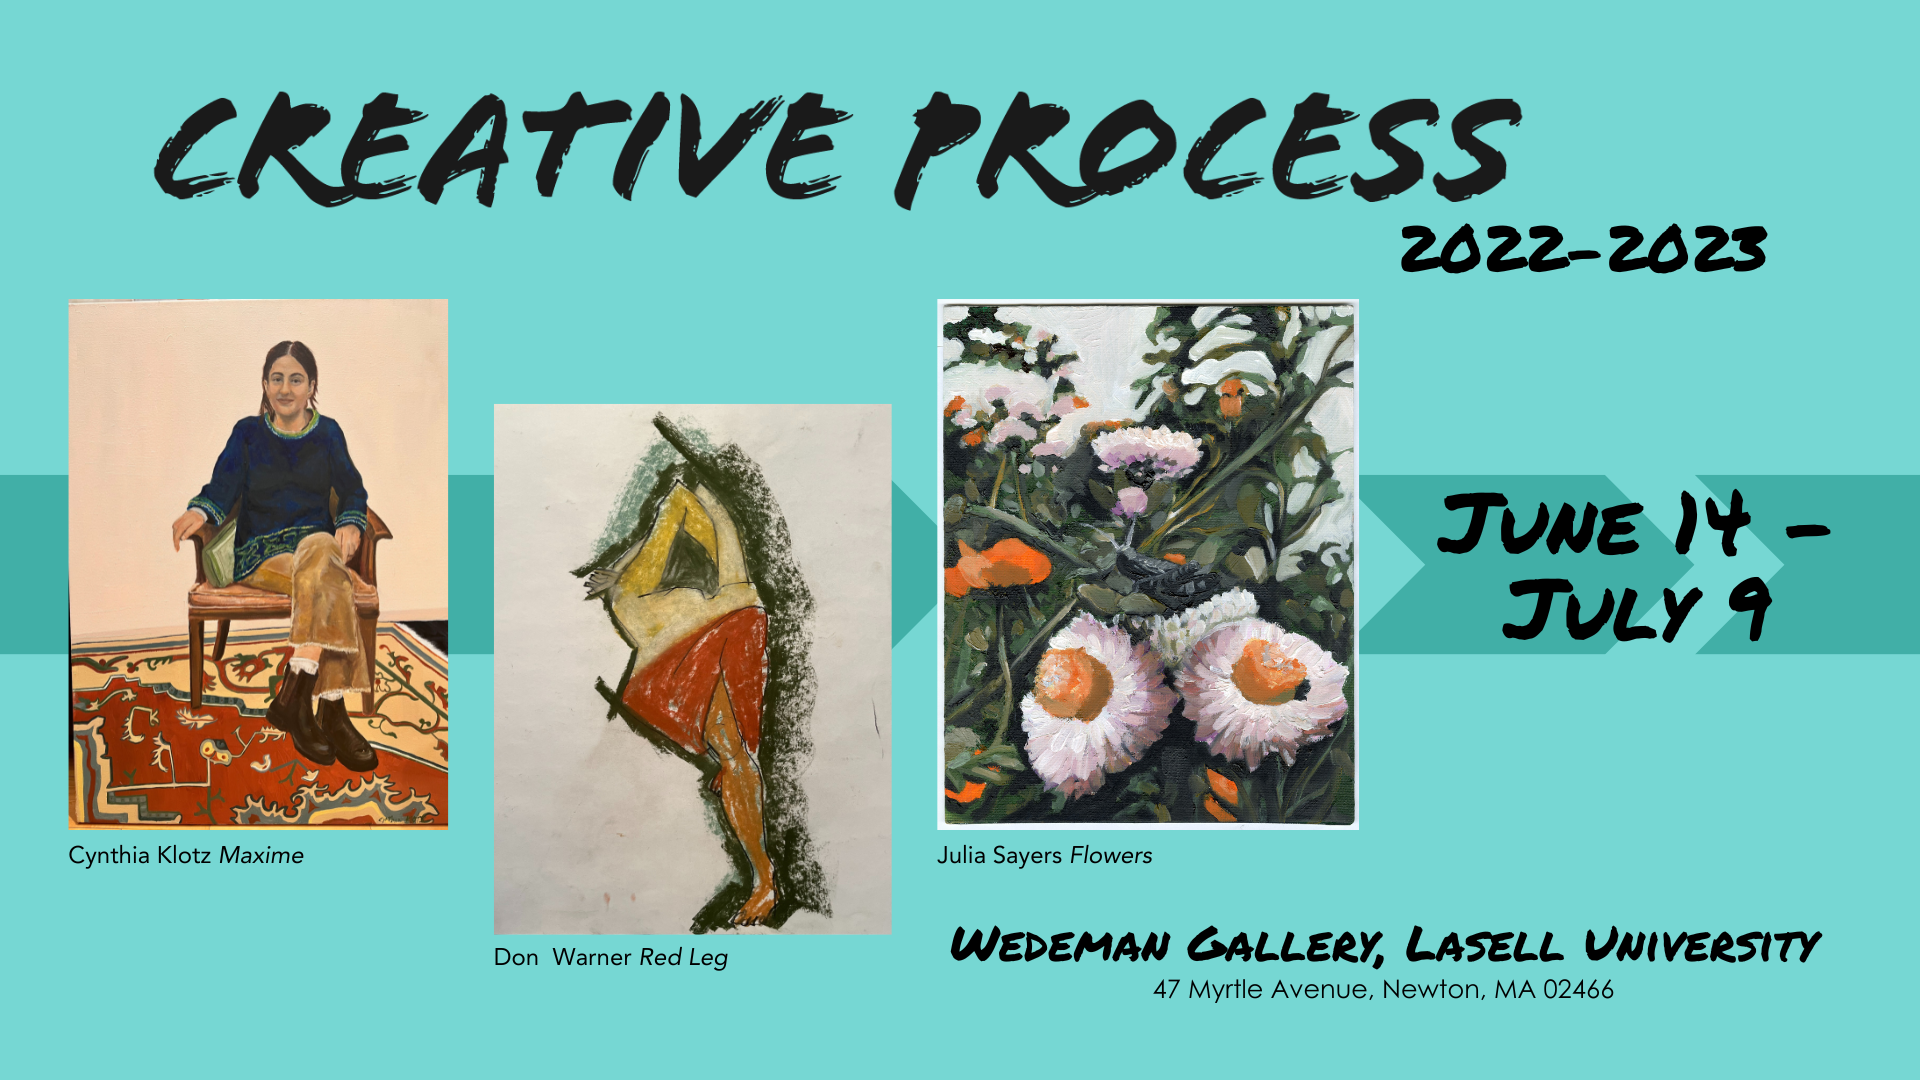 A graphic for Creative Process 2022-2023 featuring work by Cynthia Klotz, Don Warner, and Julie Sayers. The exhibition opens on June 14 and is at the Wedeman Gallery at Lasell University, located at 47 Myrtle Avenue, Newton MA